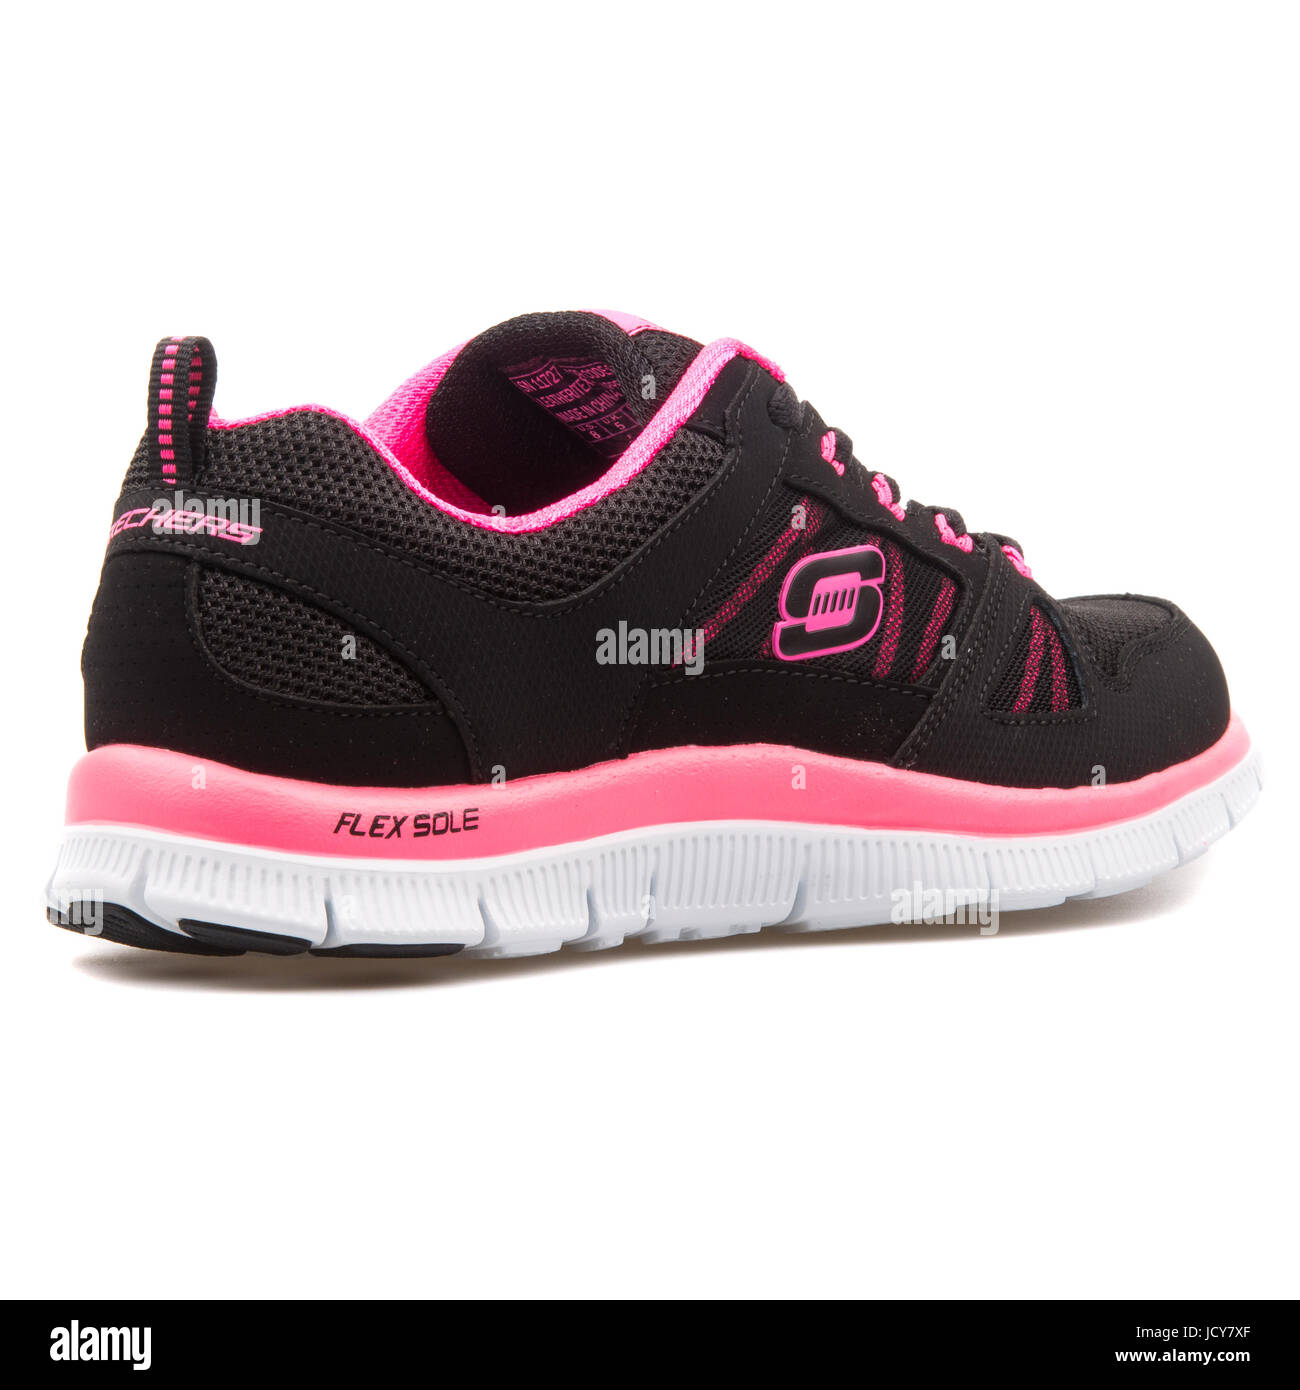 Skechers Flex Appeal Spring Fever Black and Hot Pink Women's Running Shoes  - 11727-BKHP Stock Photo - Alamy